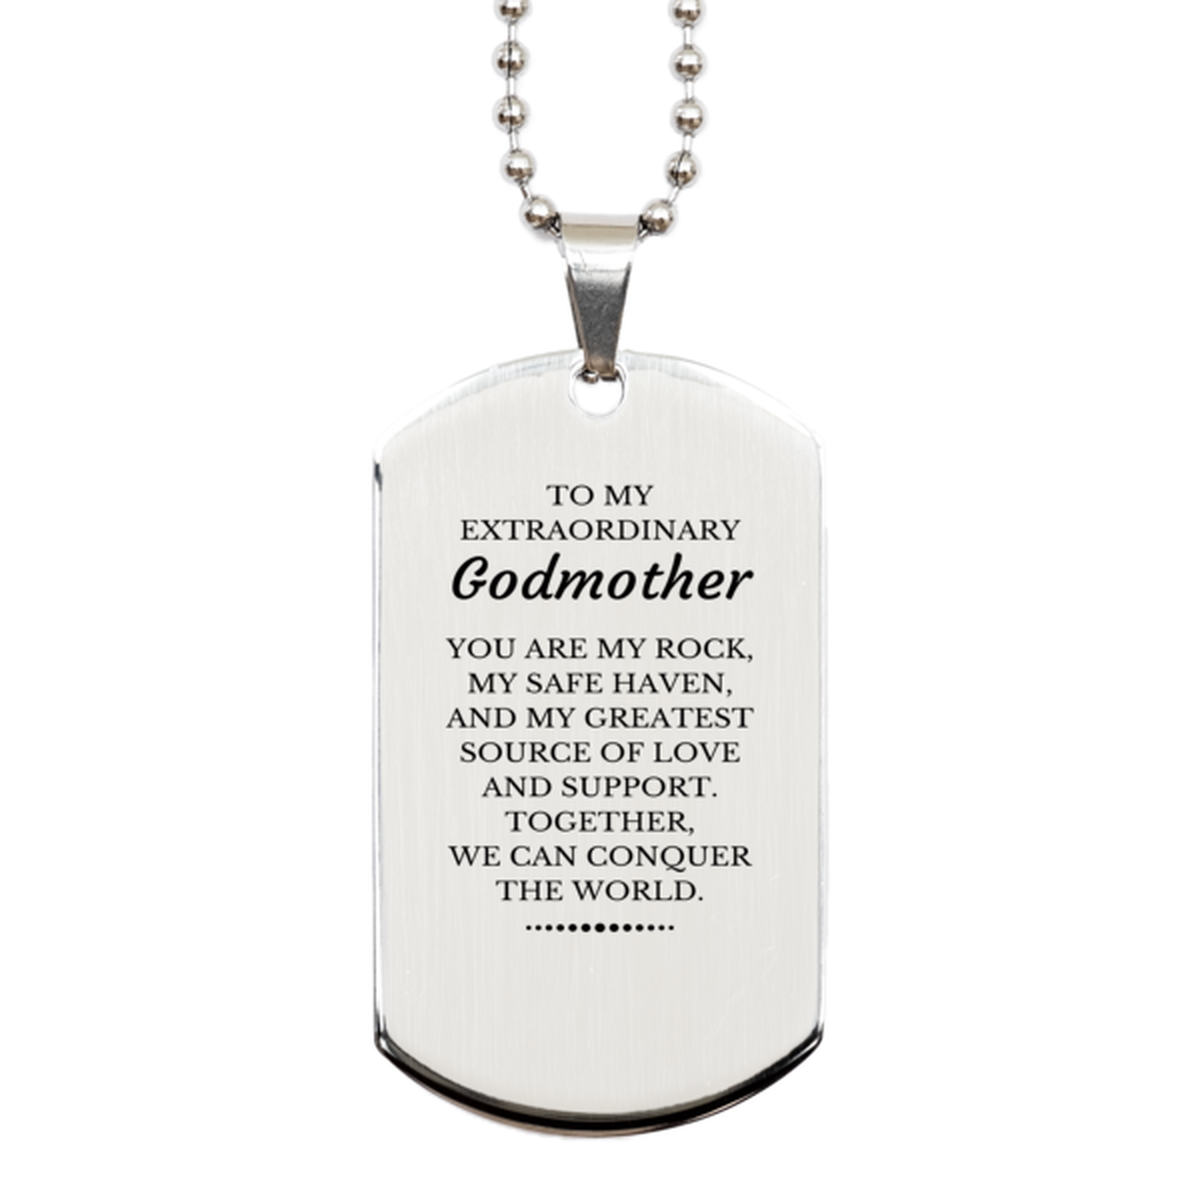 To My Extraordinary Godmother Gifts, Together, we can conquer the world, Birthday Silver Dog Tag For Godmother, Christmas Gifts For Godmother